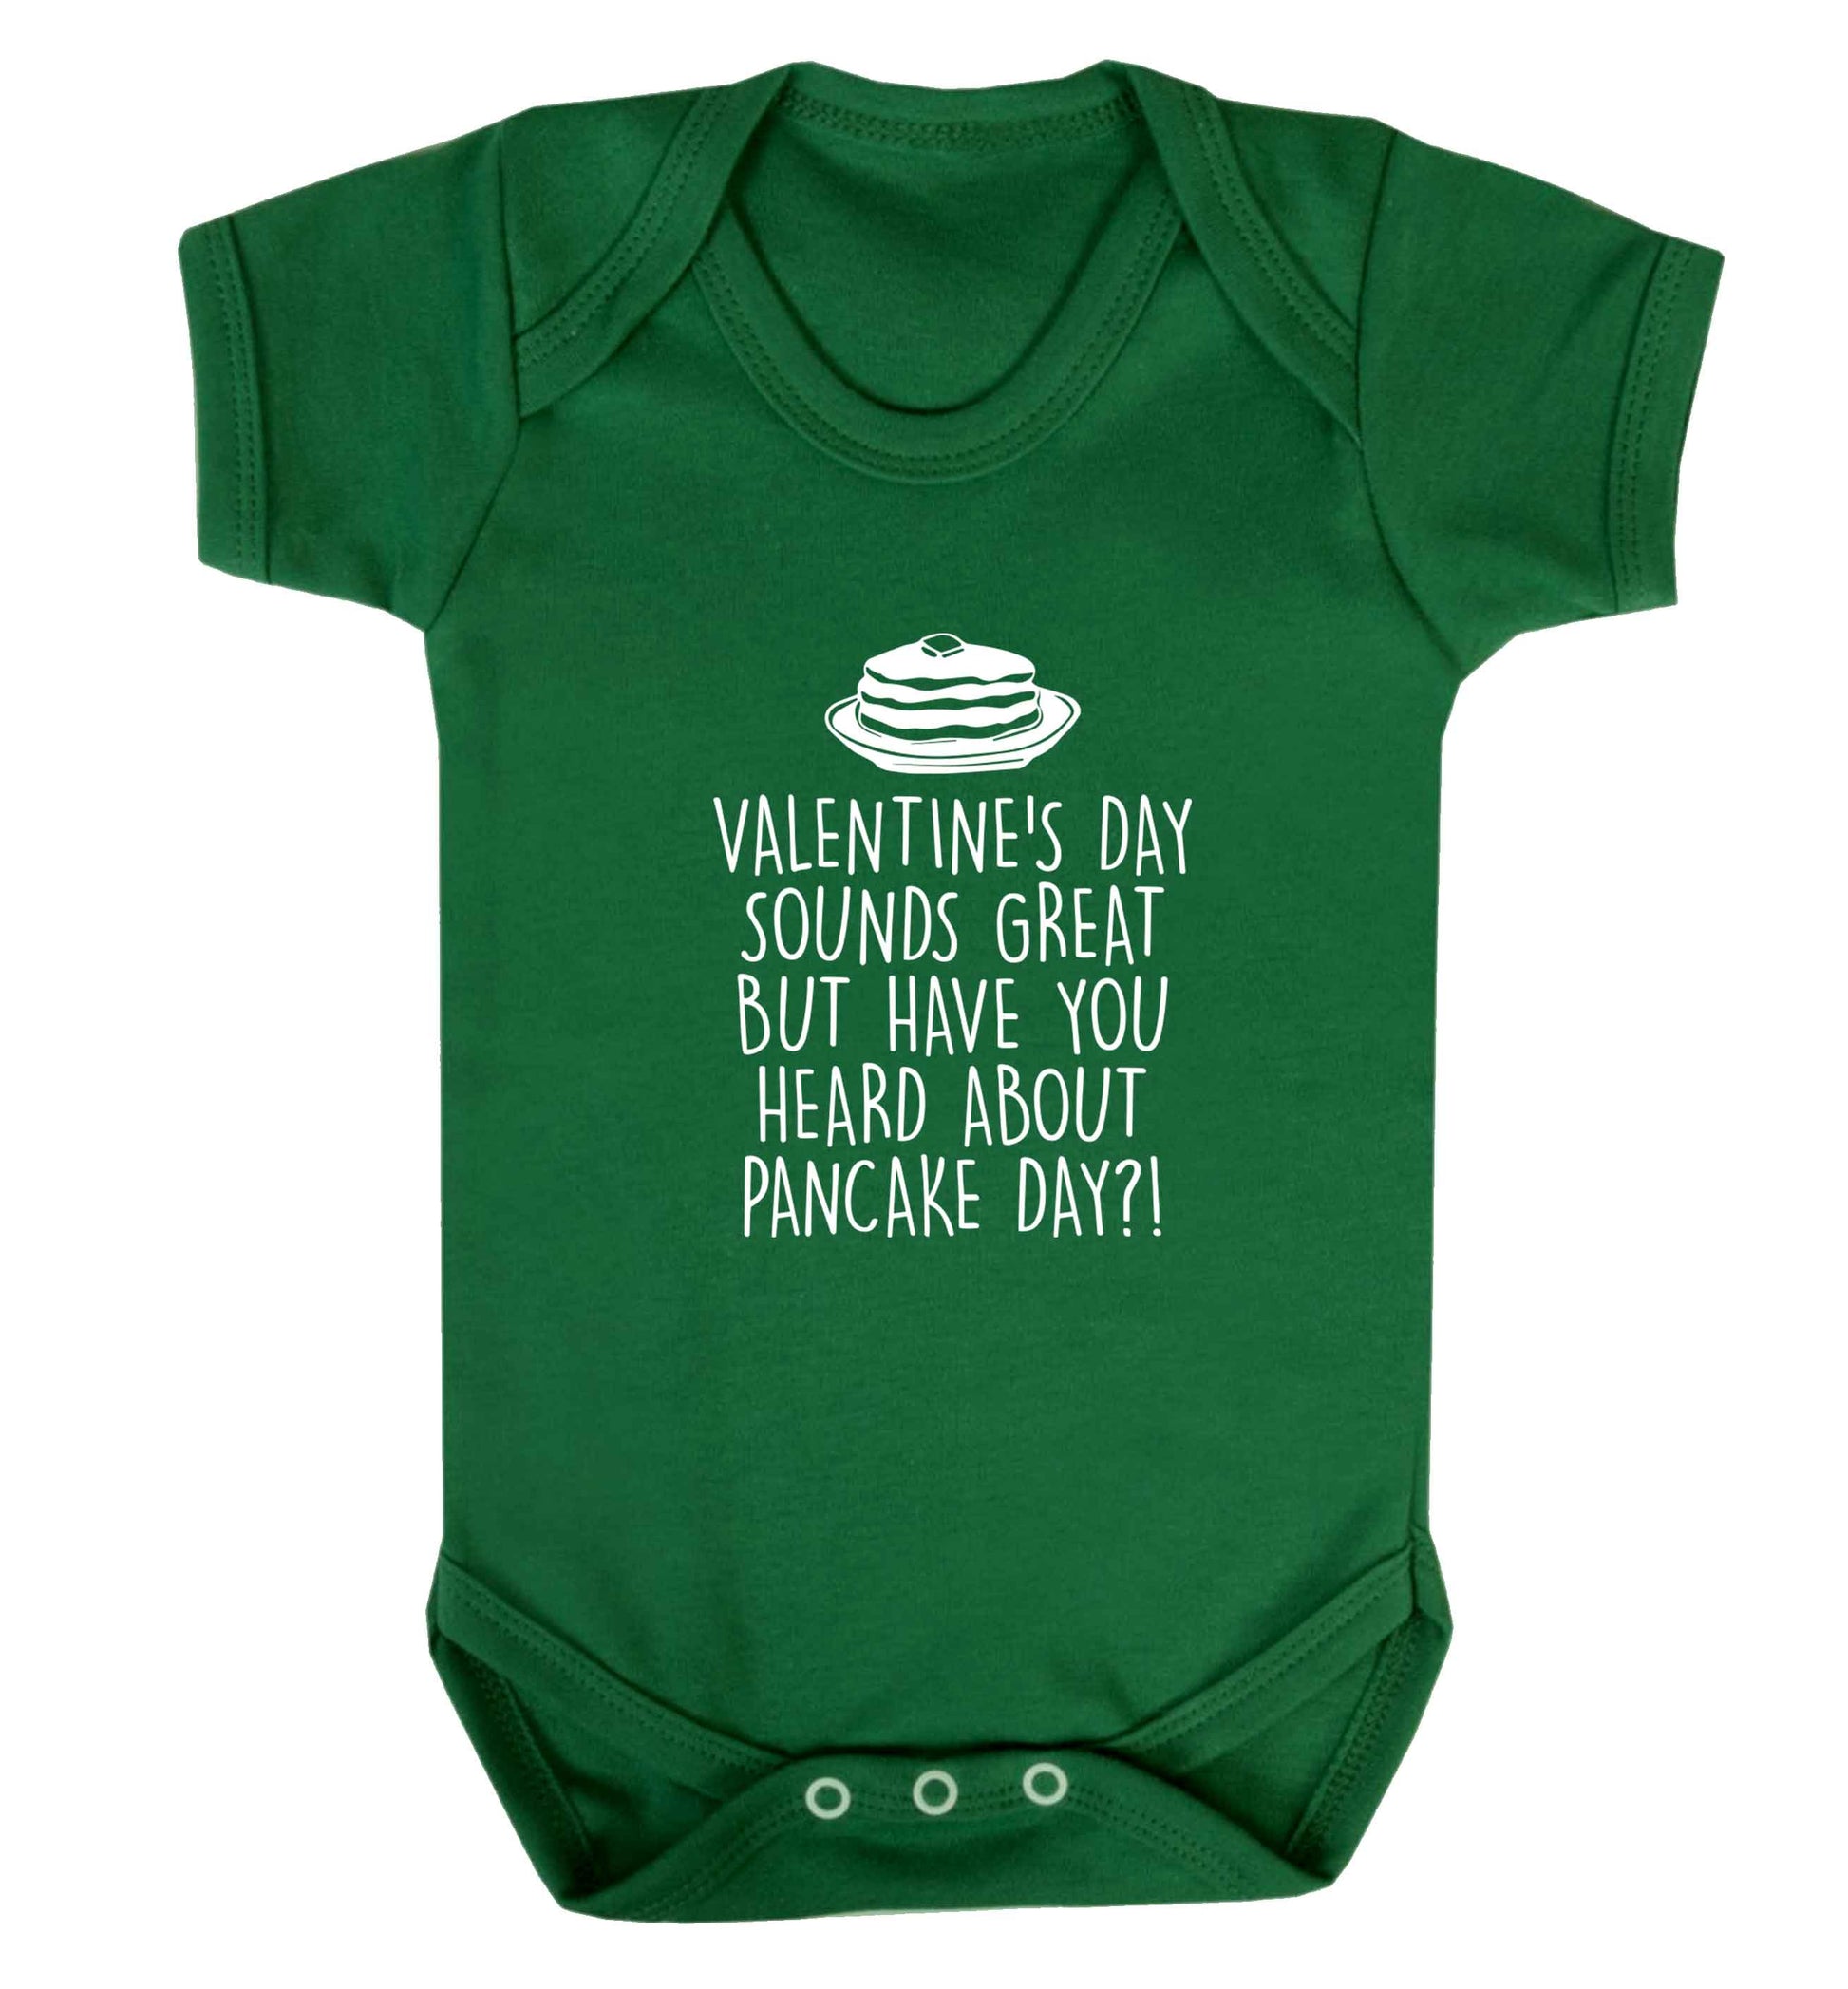 Valentine's day sounds great but have you heard about pancake day?! baby vest green 18-24 months